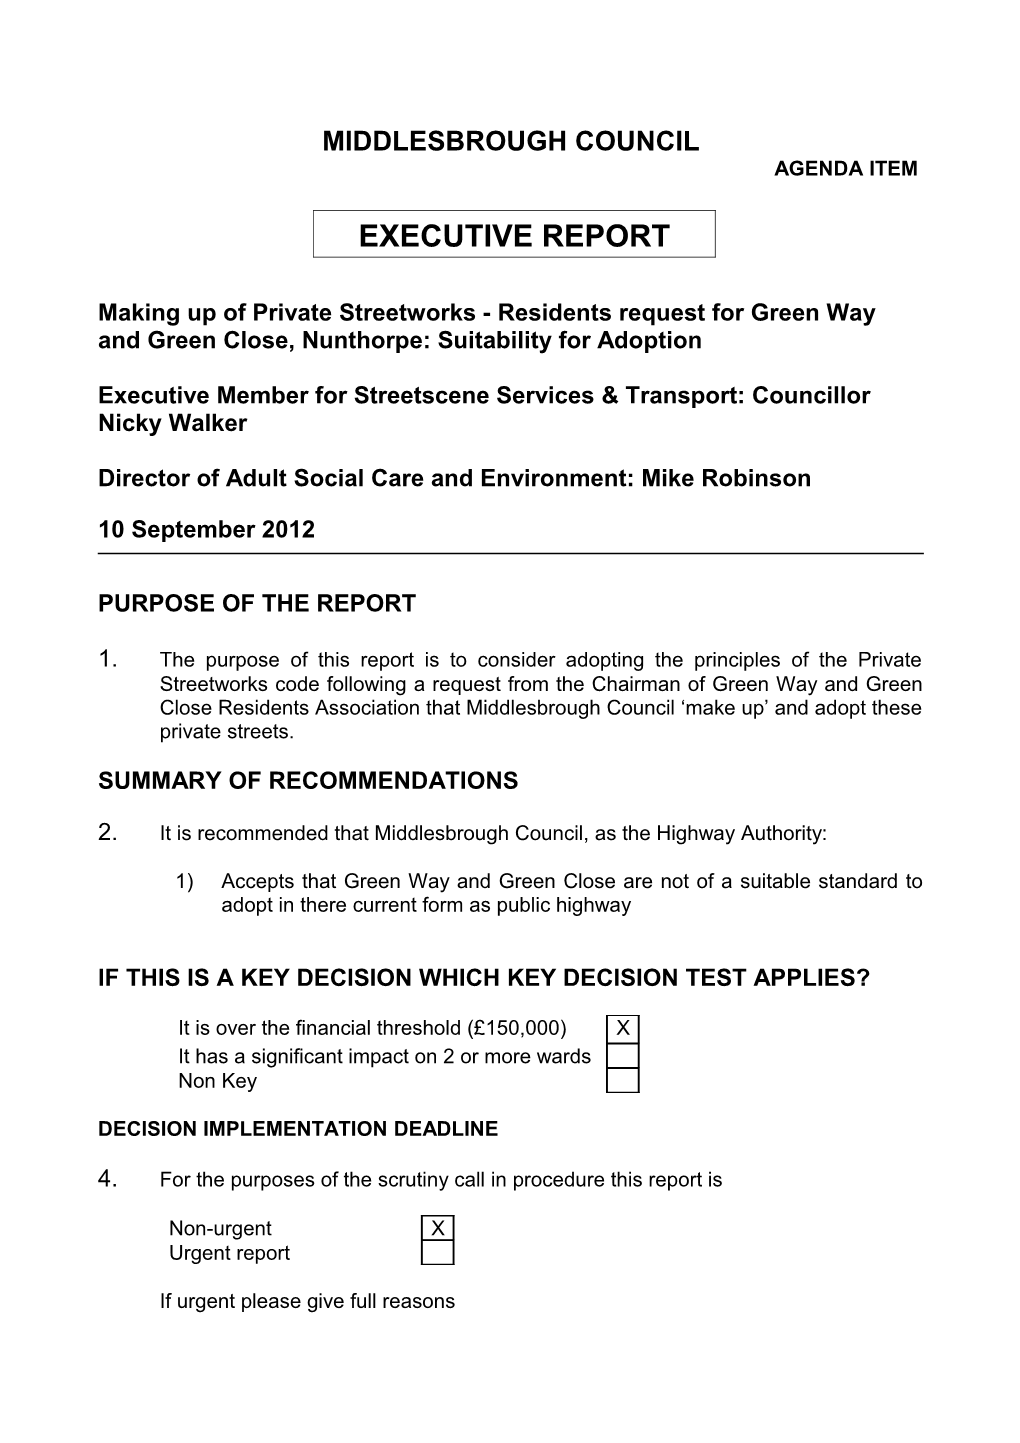 Executive Member for Streetscene Services & Transport: Councillor Nicky Walker